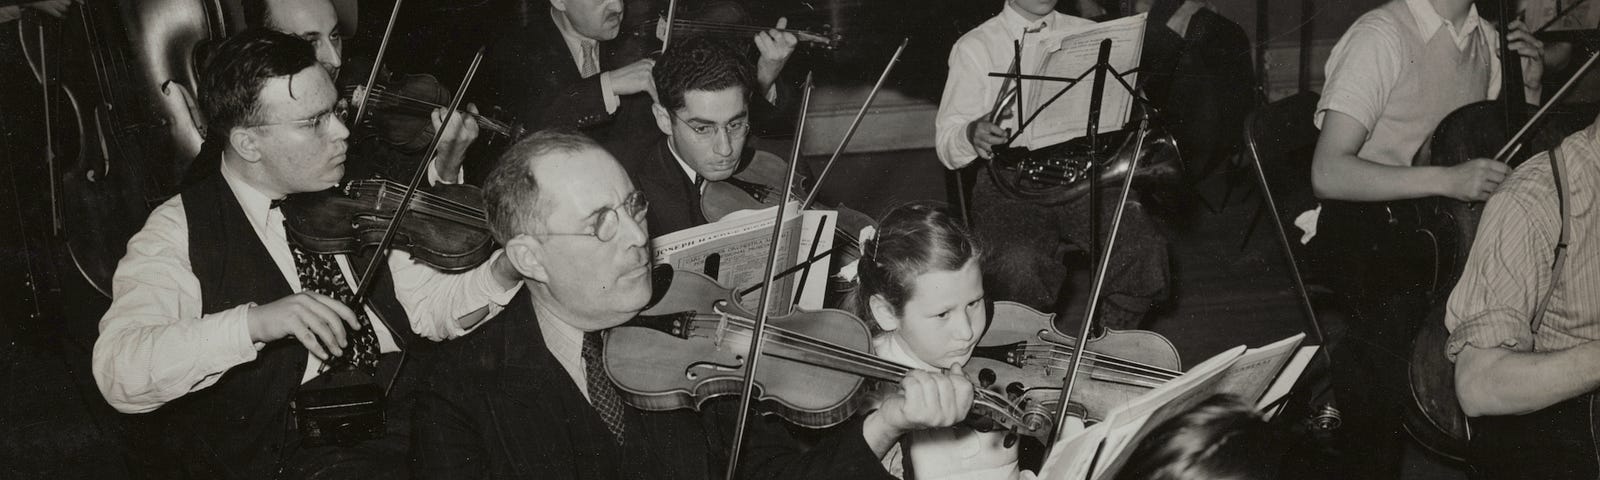 a portion of an orchestra of both adults and children mostly playing violins with a piano in the background.